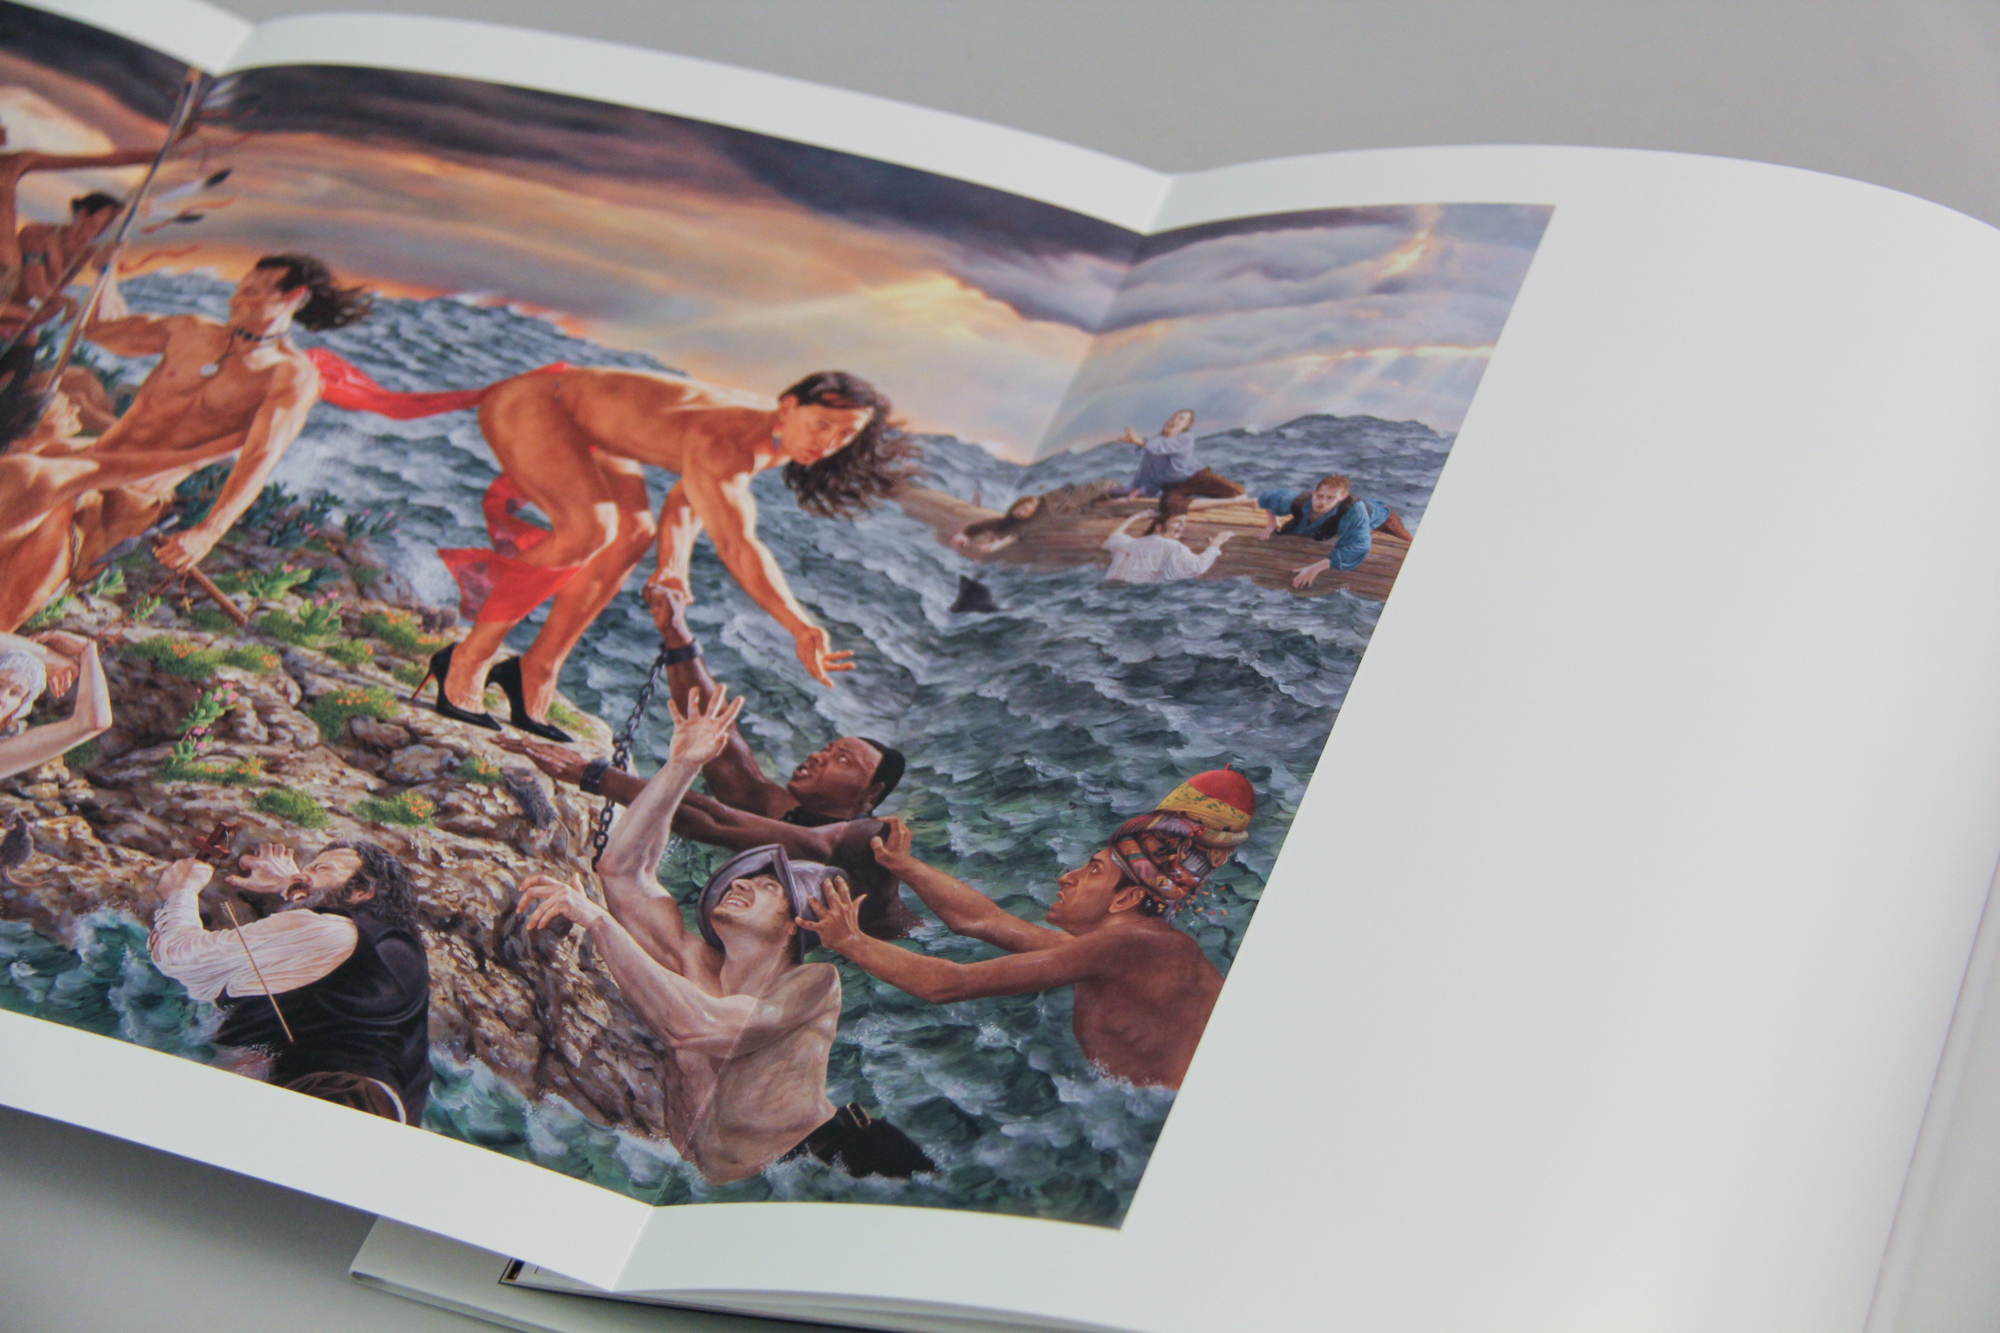 Kent Monkman: Revision and Resistance Product Image 3 of 7